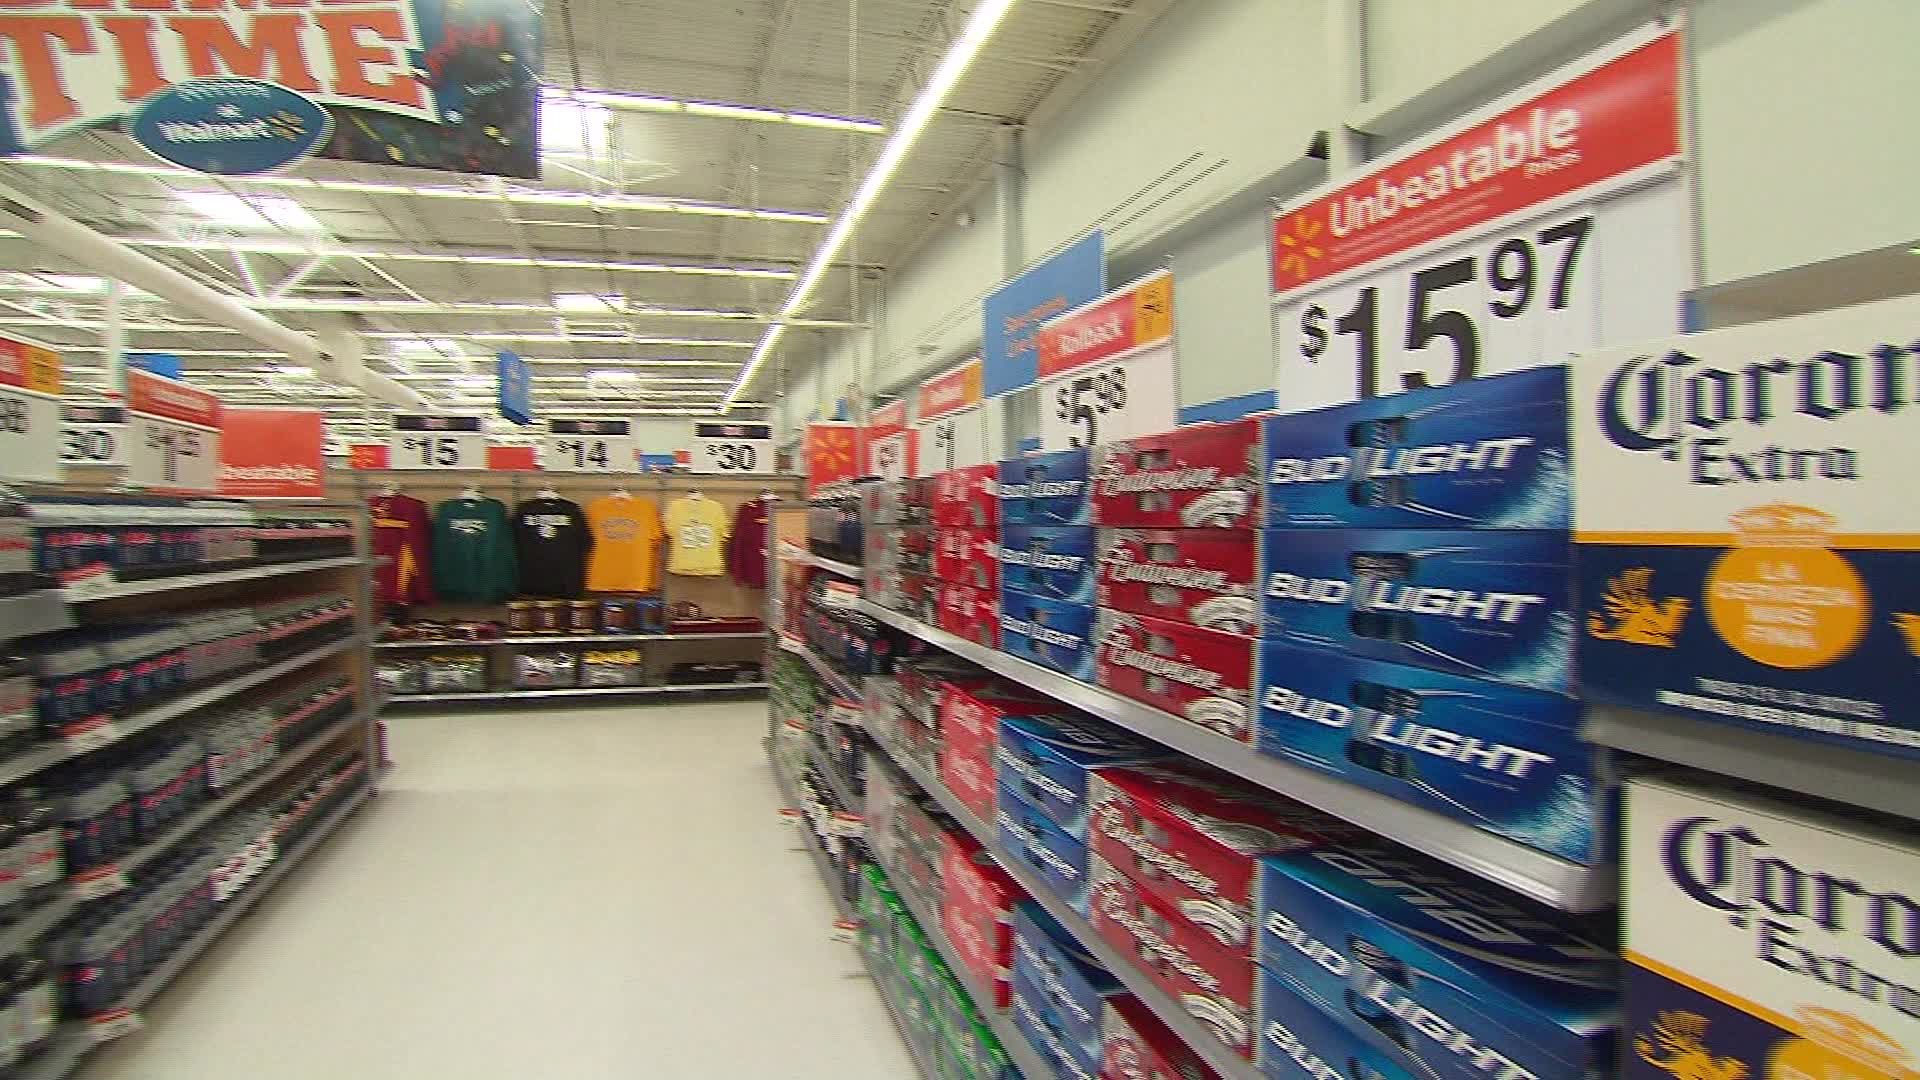 Walmart offers curbside alcohol pickup